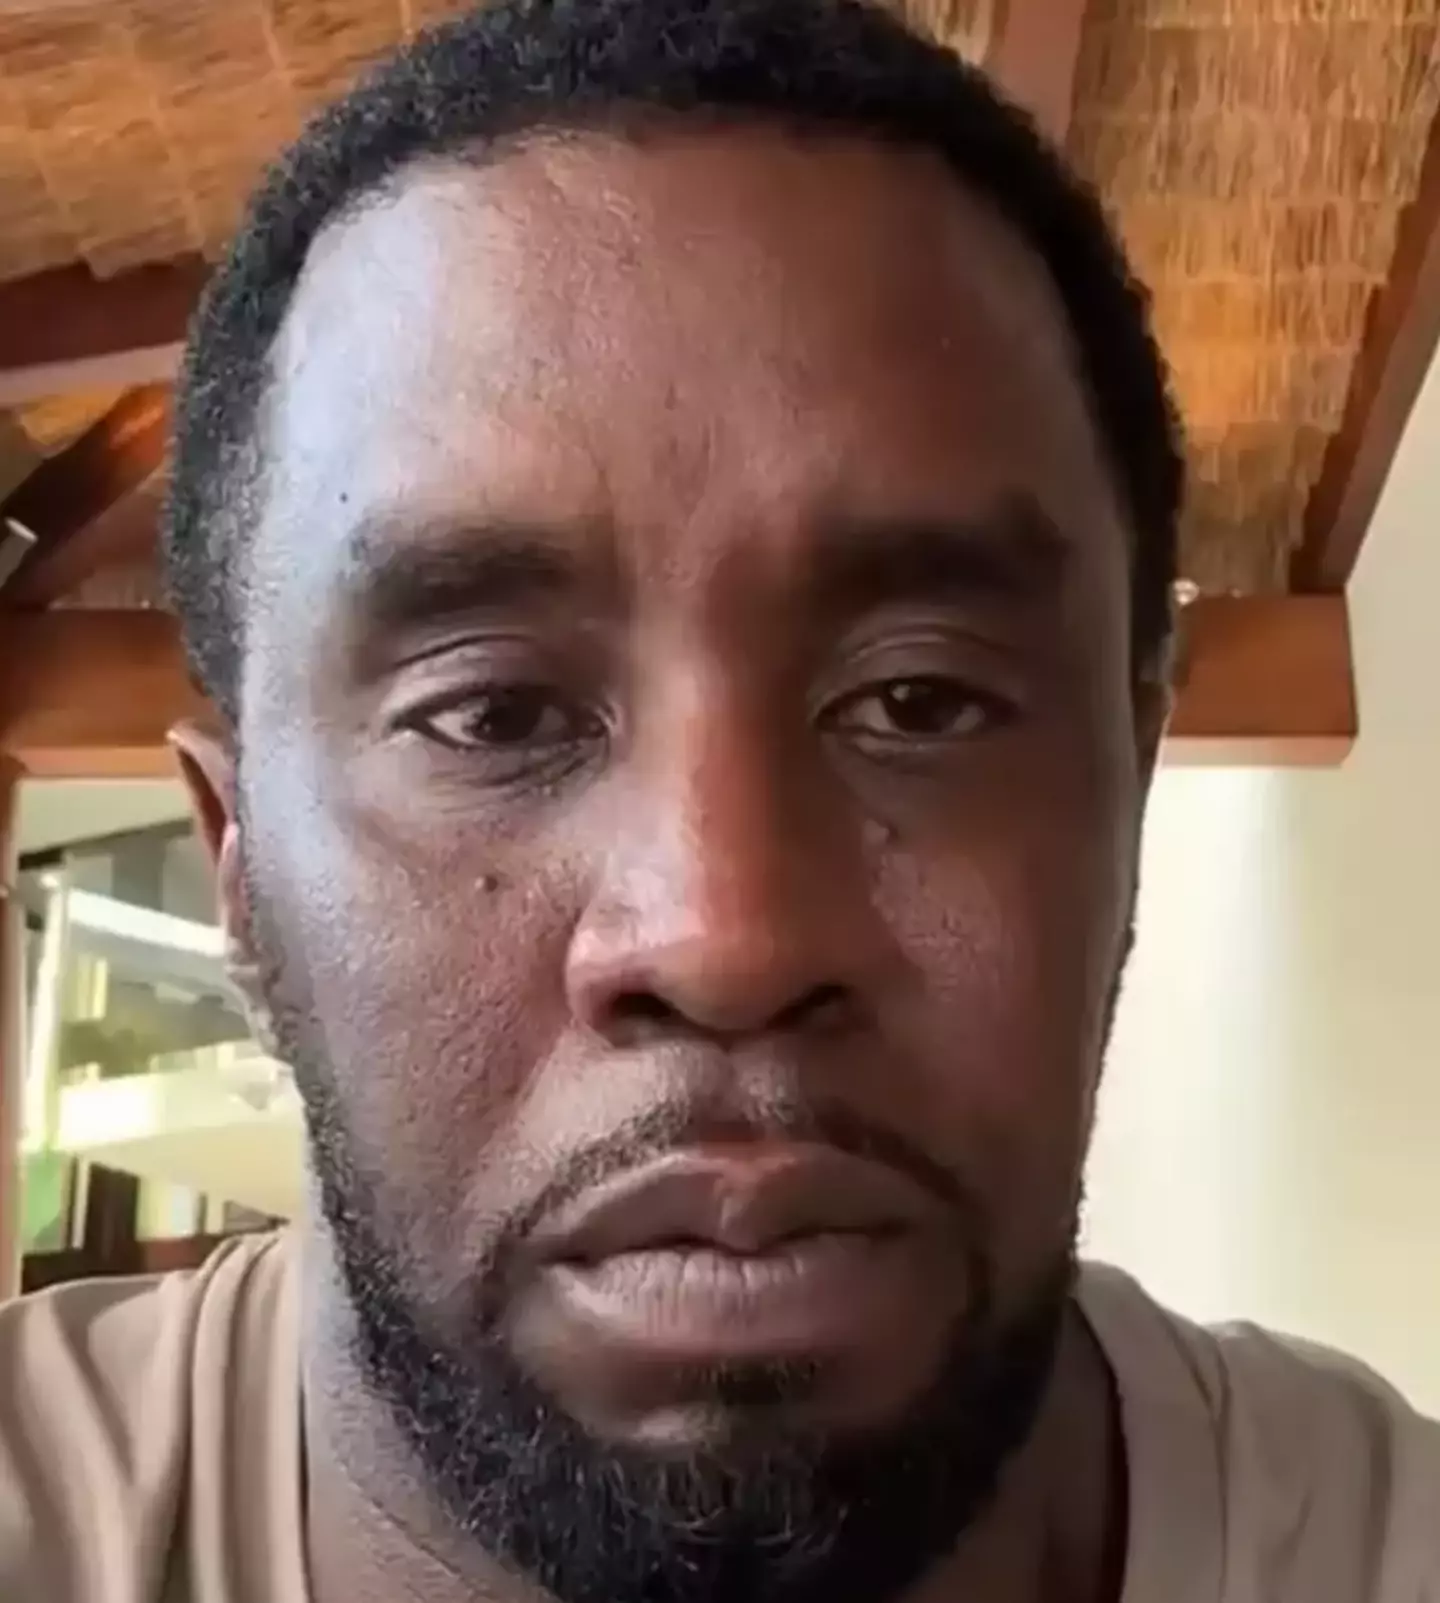 The rapper has issued an apology. (Instagram/@diddy)